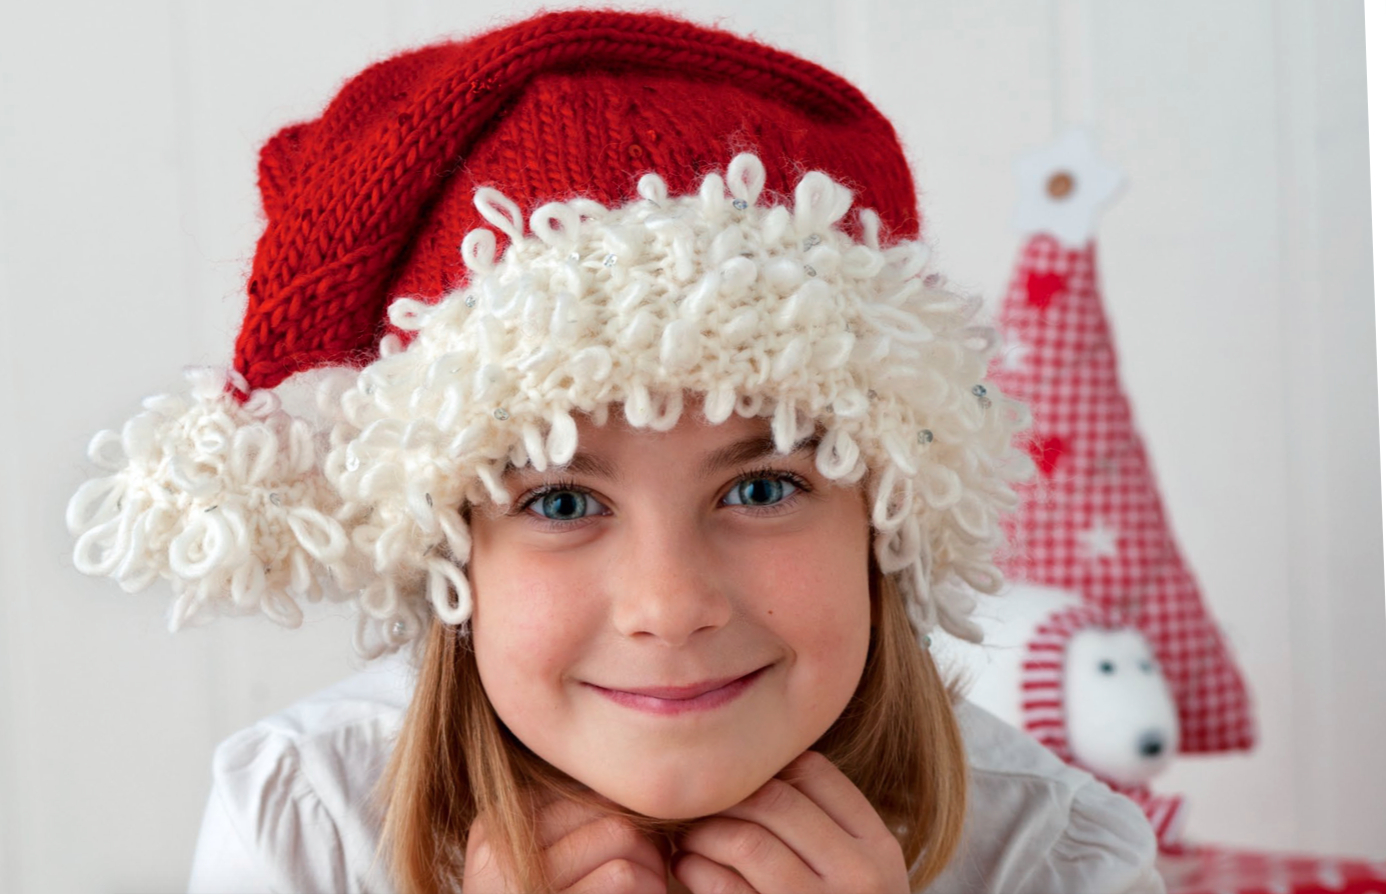 Knit Santa Hat Pattern Free Download Our Top 10 Free Christmas Knitting Patterns The Yarn Loop